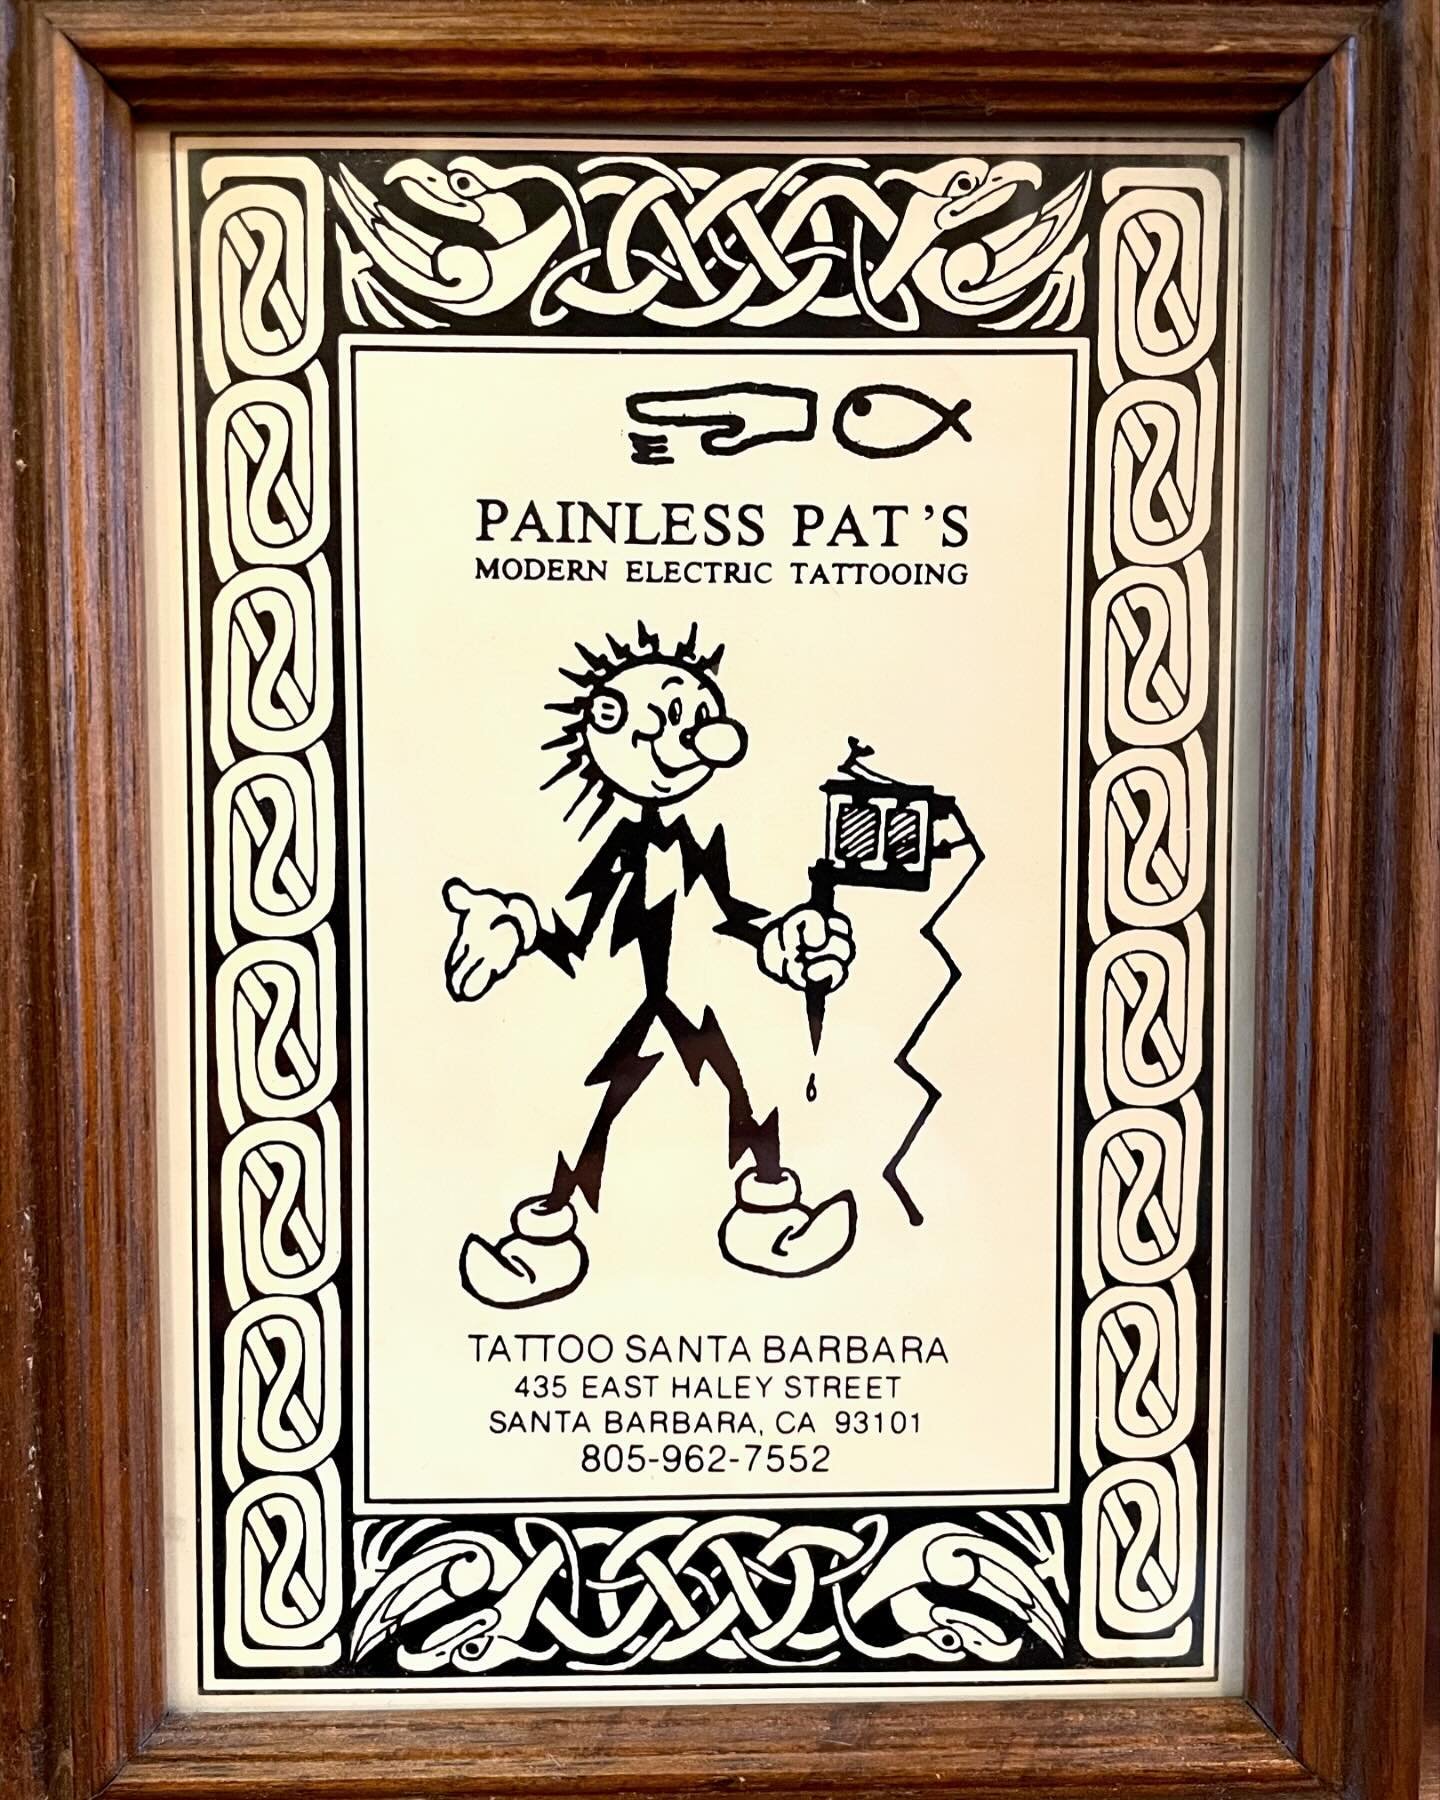 Today's fun find...
A vintage mashup of Reddy Kilowatt and tattoos! It's a framed 5x7 display ad for Santa Barbara tattoo artist, Pat Fish. Guessing c.1990...?
When coworker Aaron saw it he said,&quot;Hey! I got inked by her in about 2002!&quot;

#re